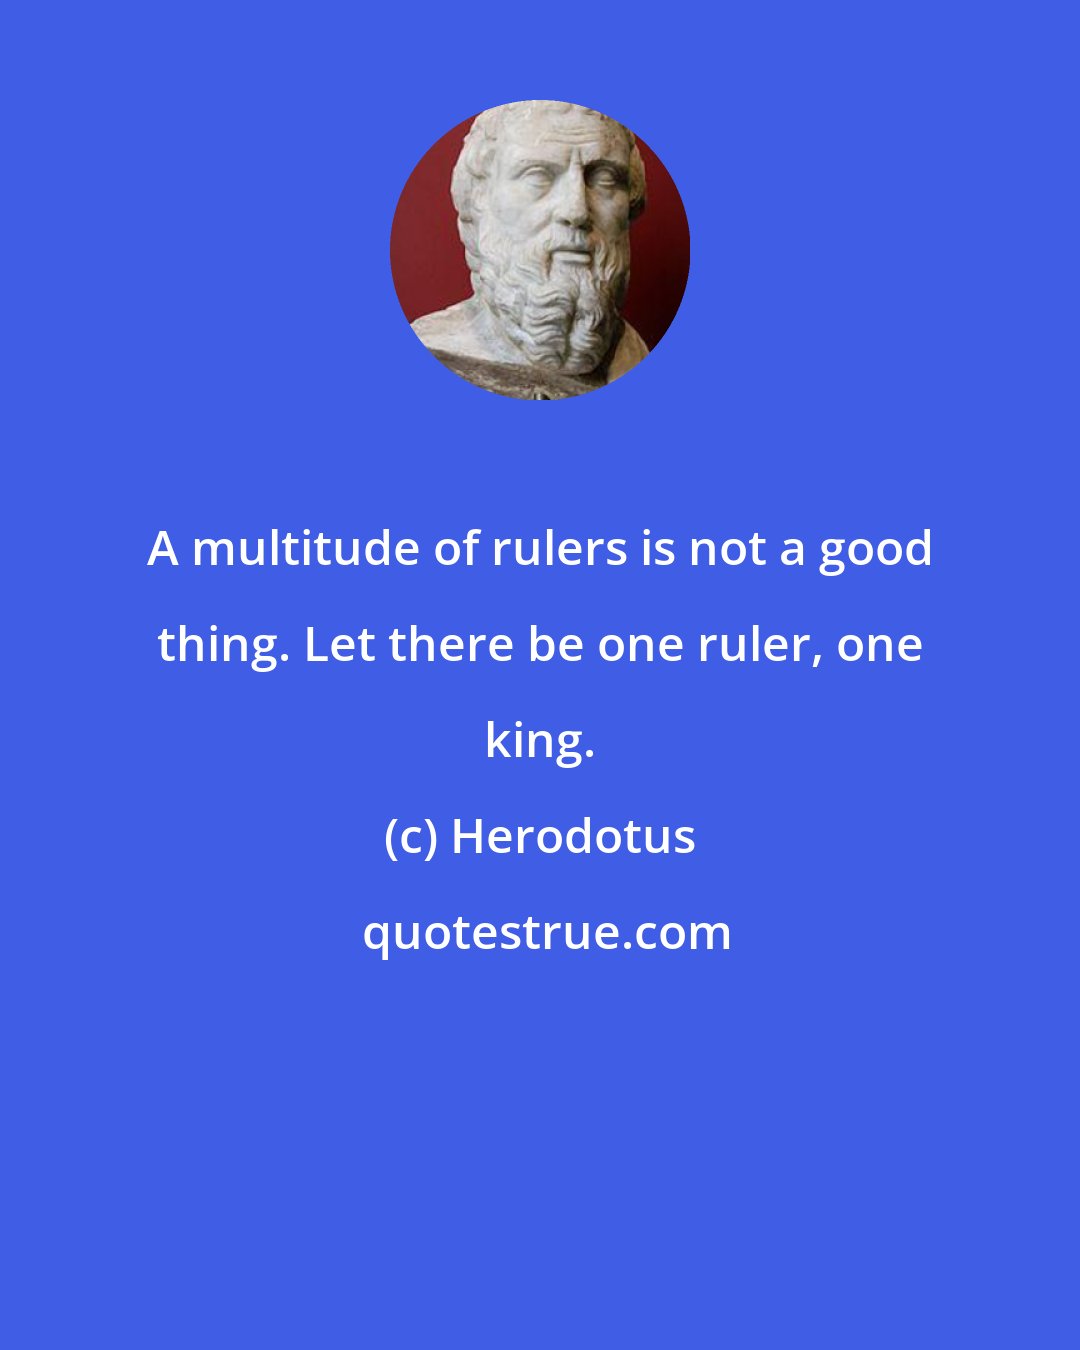 Herodotus: A multitude of rulers is not a good thing. Let there be one ruler, one king.